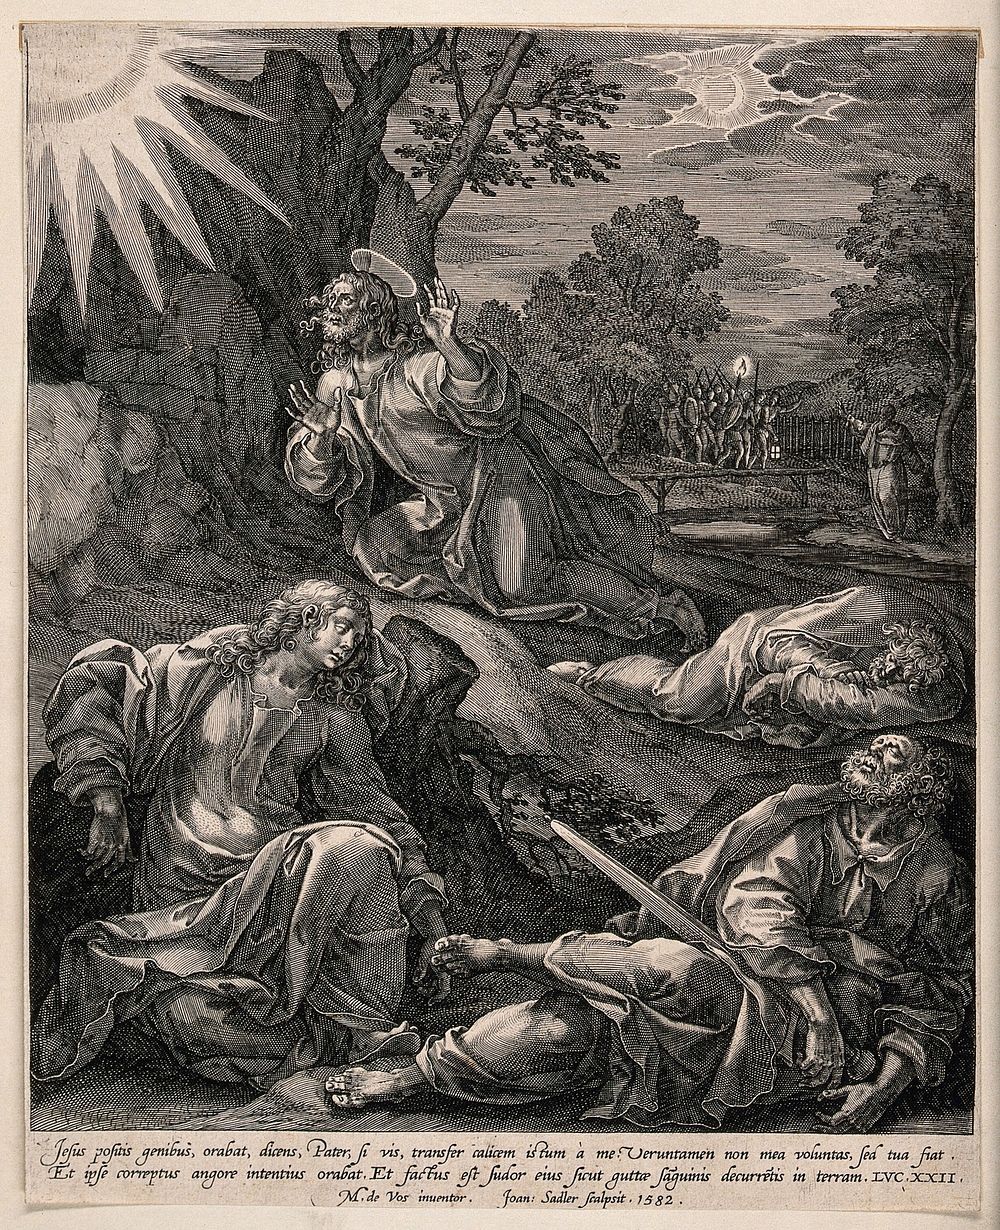 The agony in the garden; the apostles slumber while the soldiers and priests approach. Engraving by J. Sadeler, 1582, after…